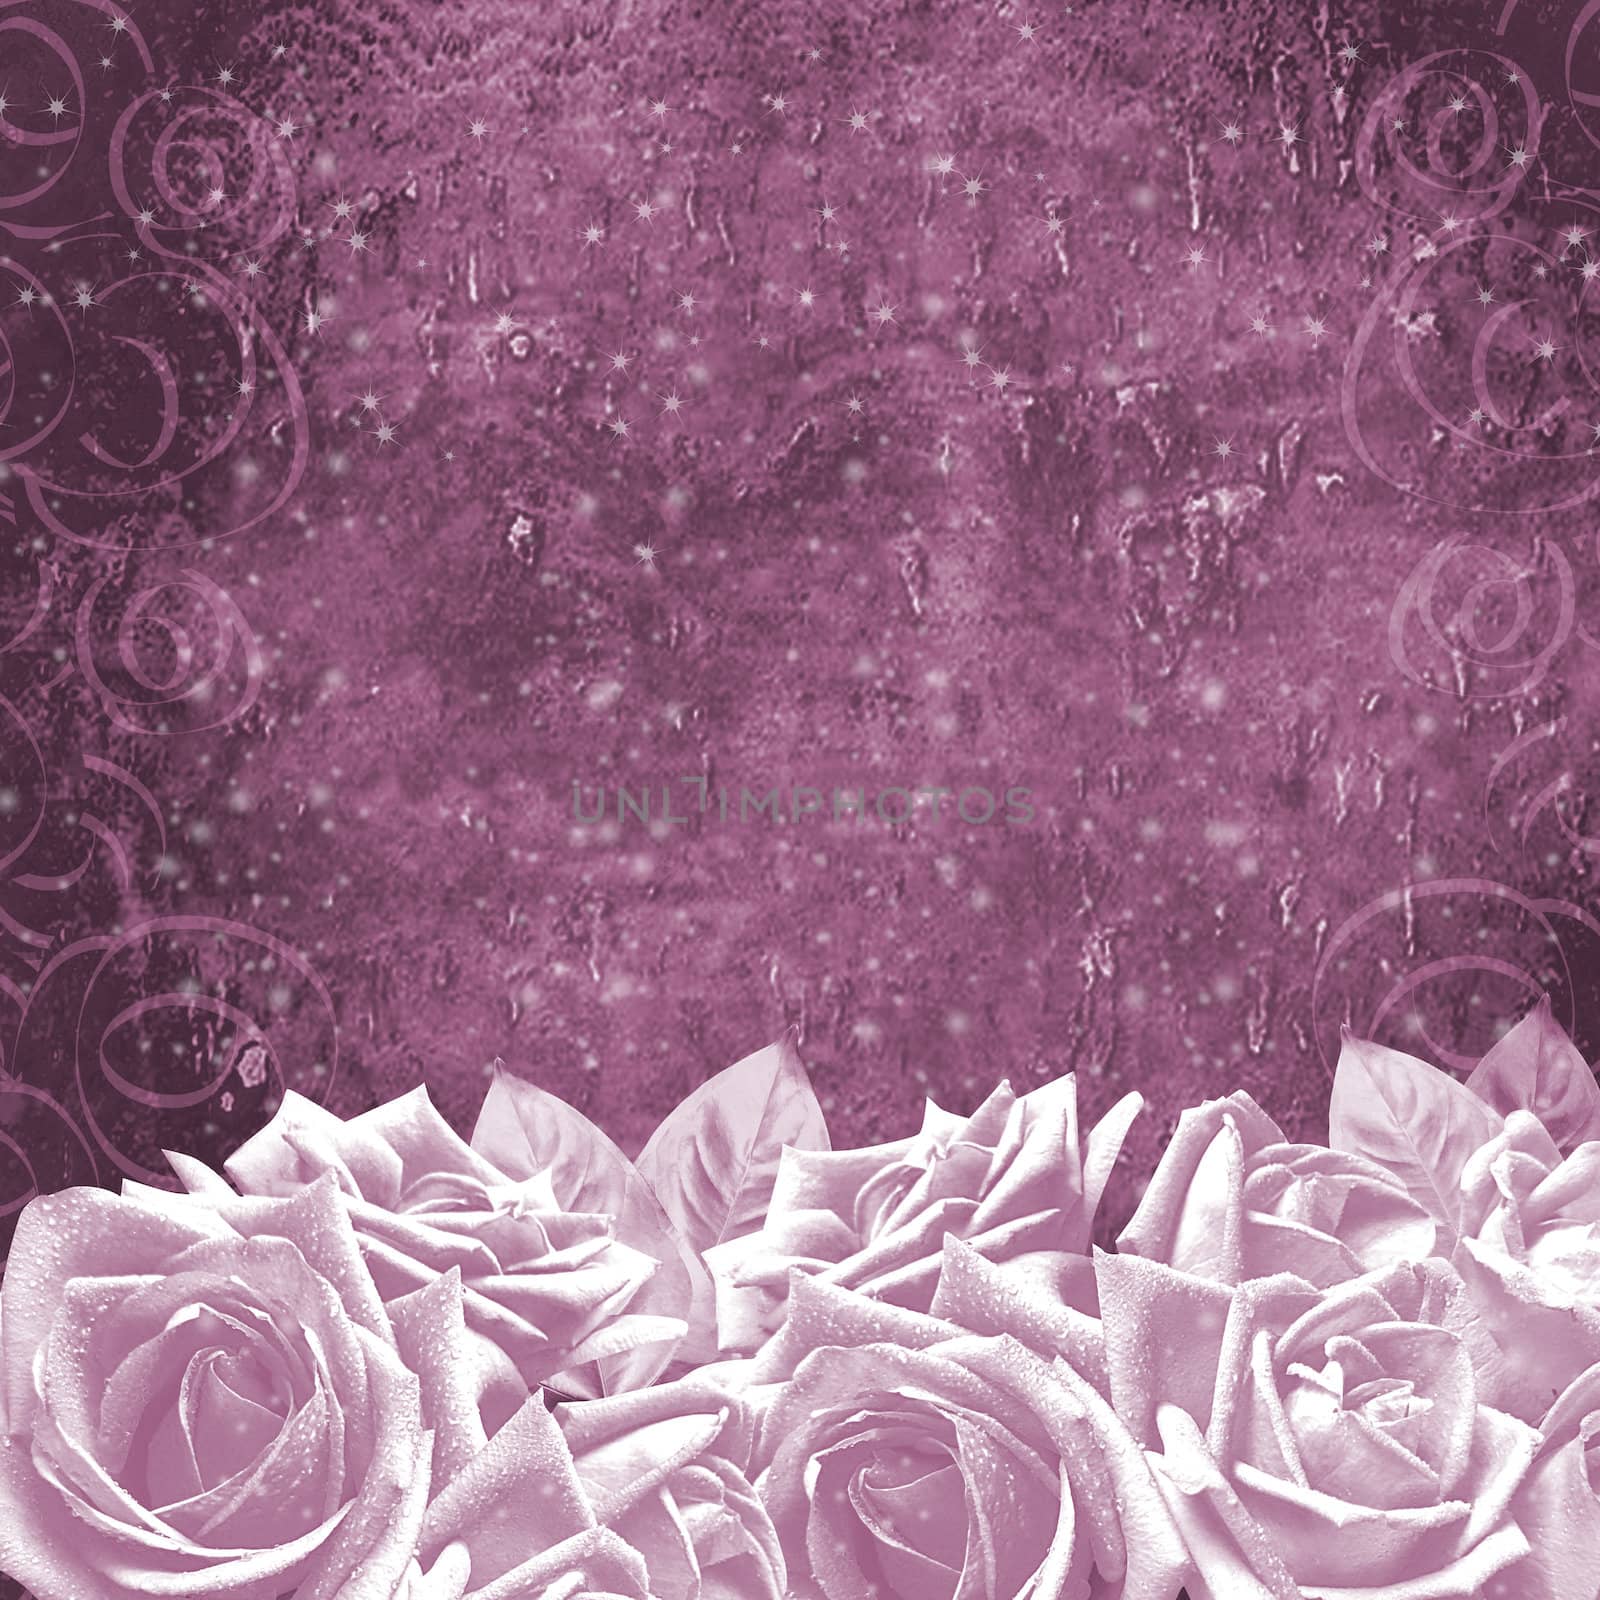 Roses background by grace21